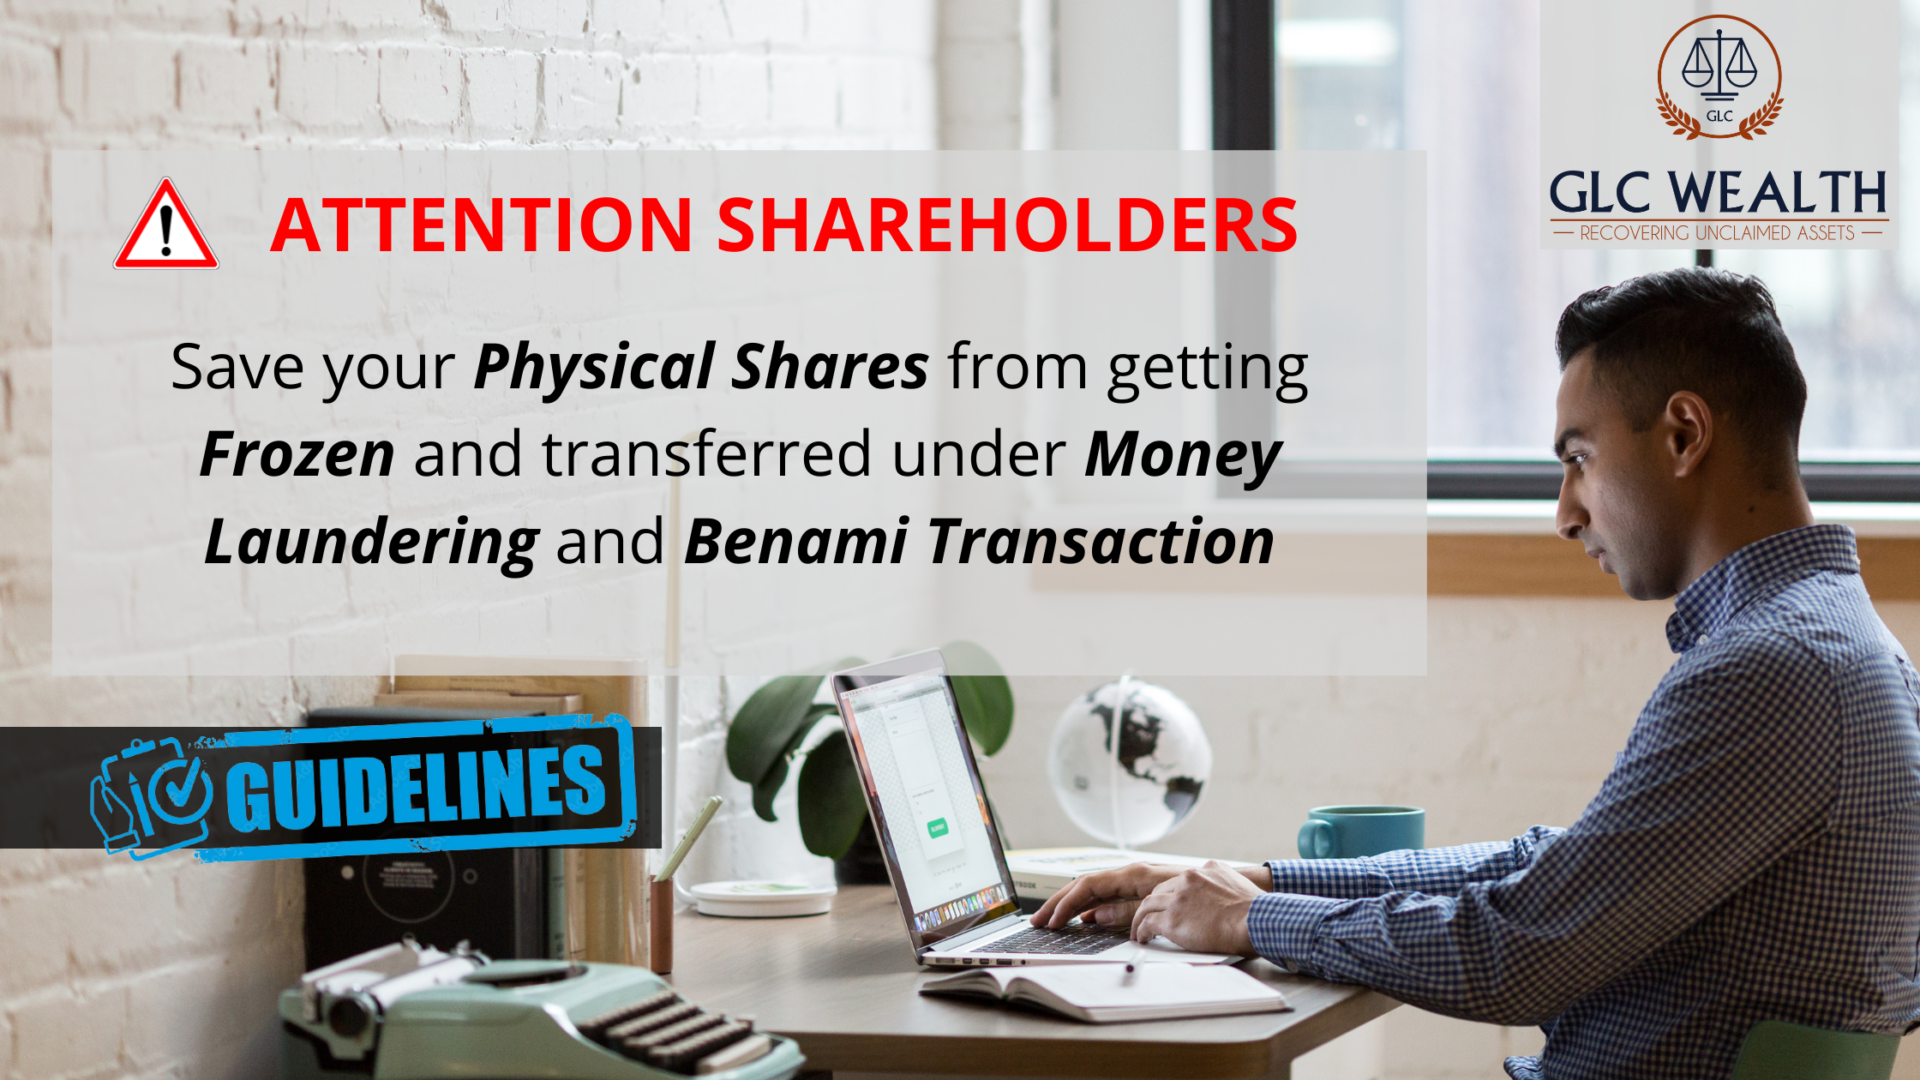 New Guidelines for all Shareholders Holding Physical Shares